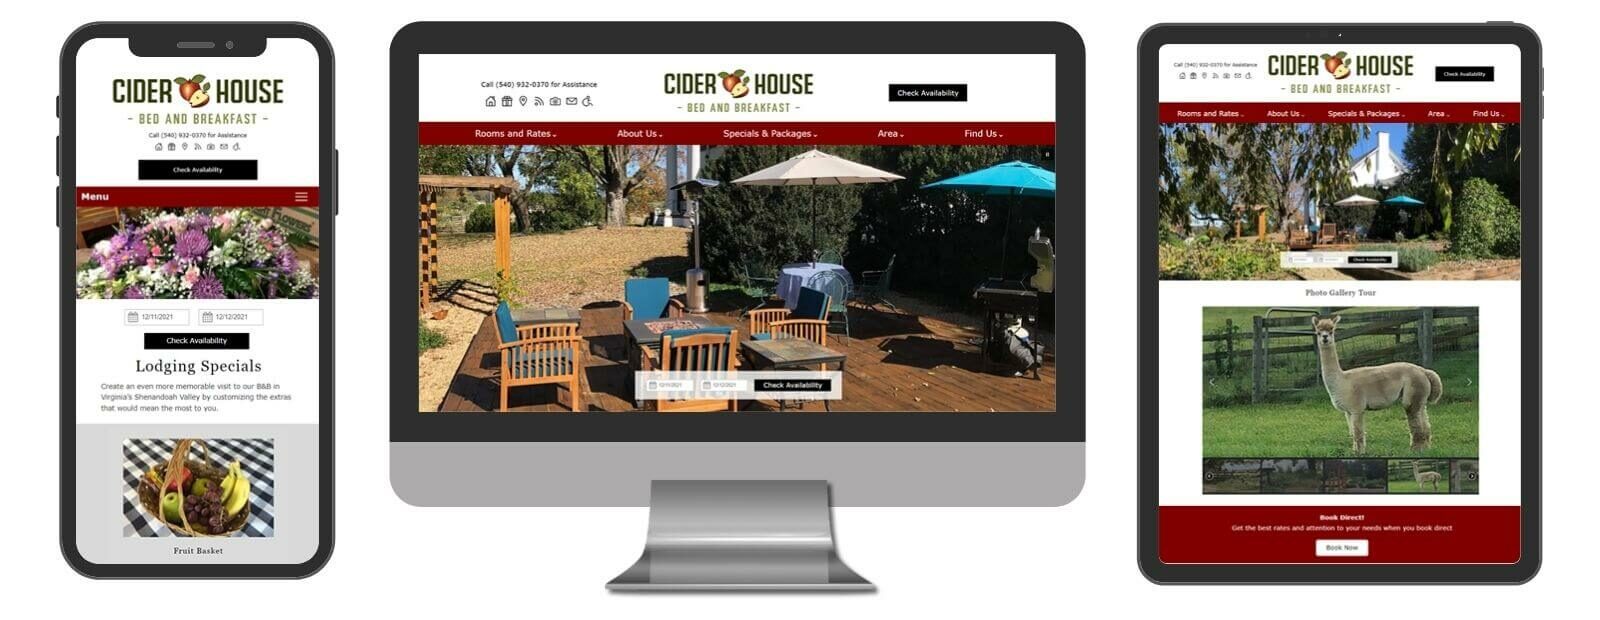 Cider House Bed and Breakfast displayed in 3 sizes - mobile, template and desktop